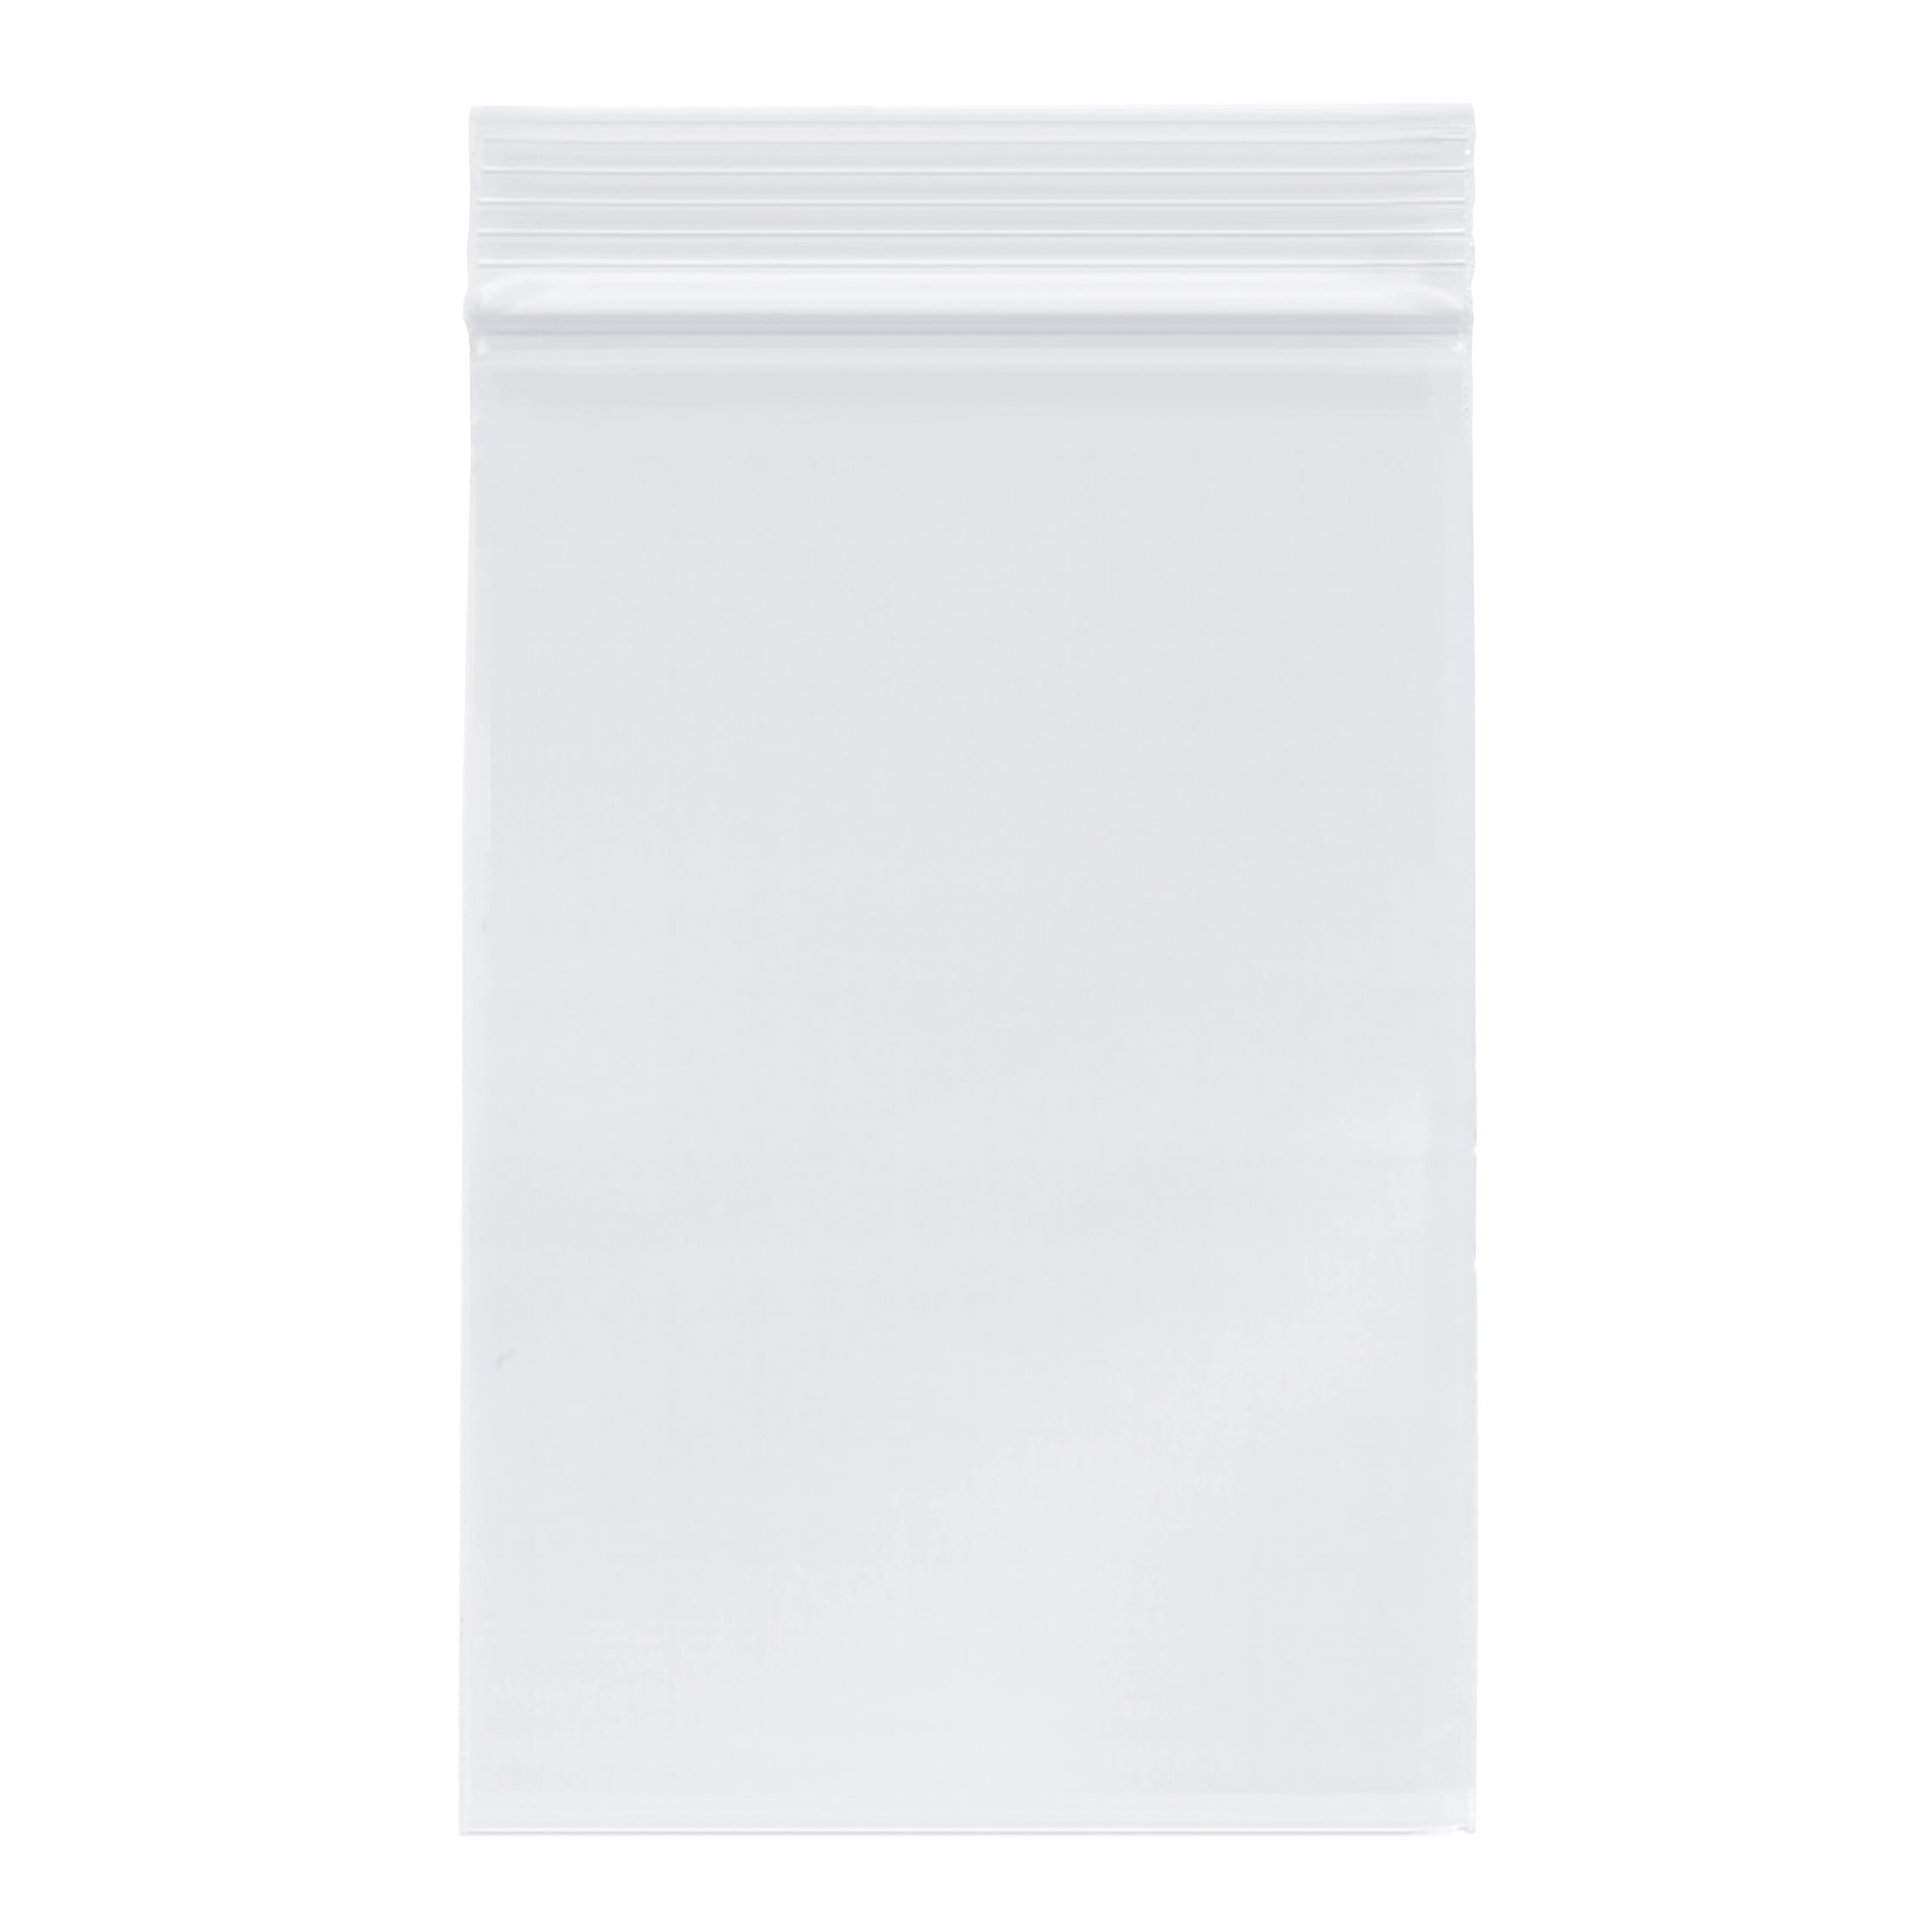 100 6x9 Reclosable Resealable Clear Zipper Plastic Bags 2Mil 6"x9" inch 